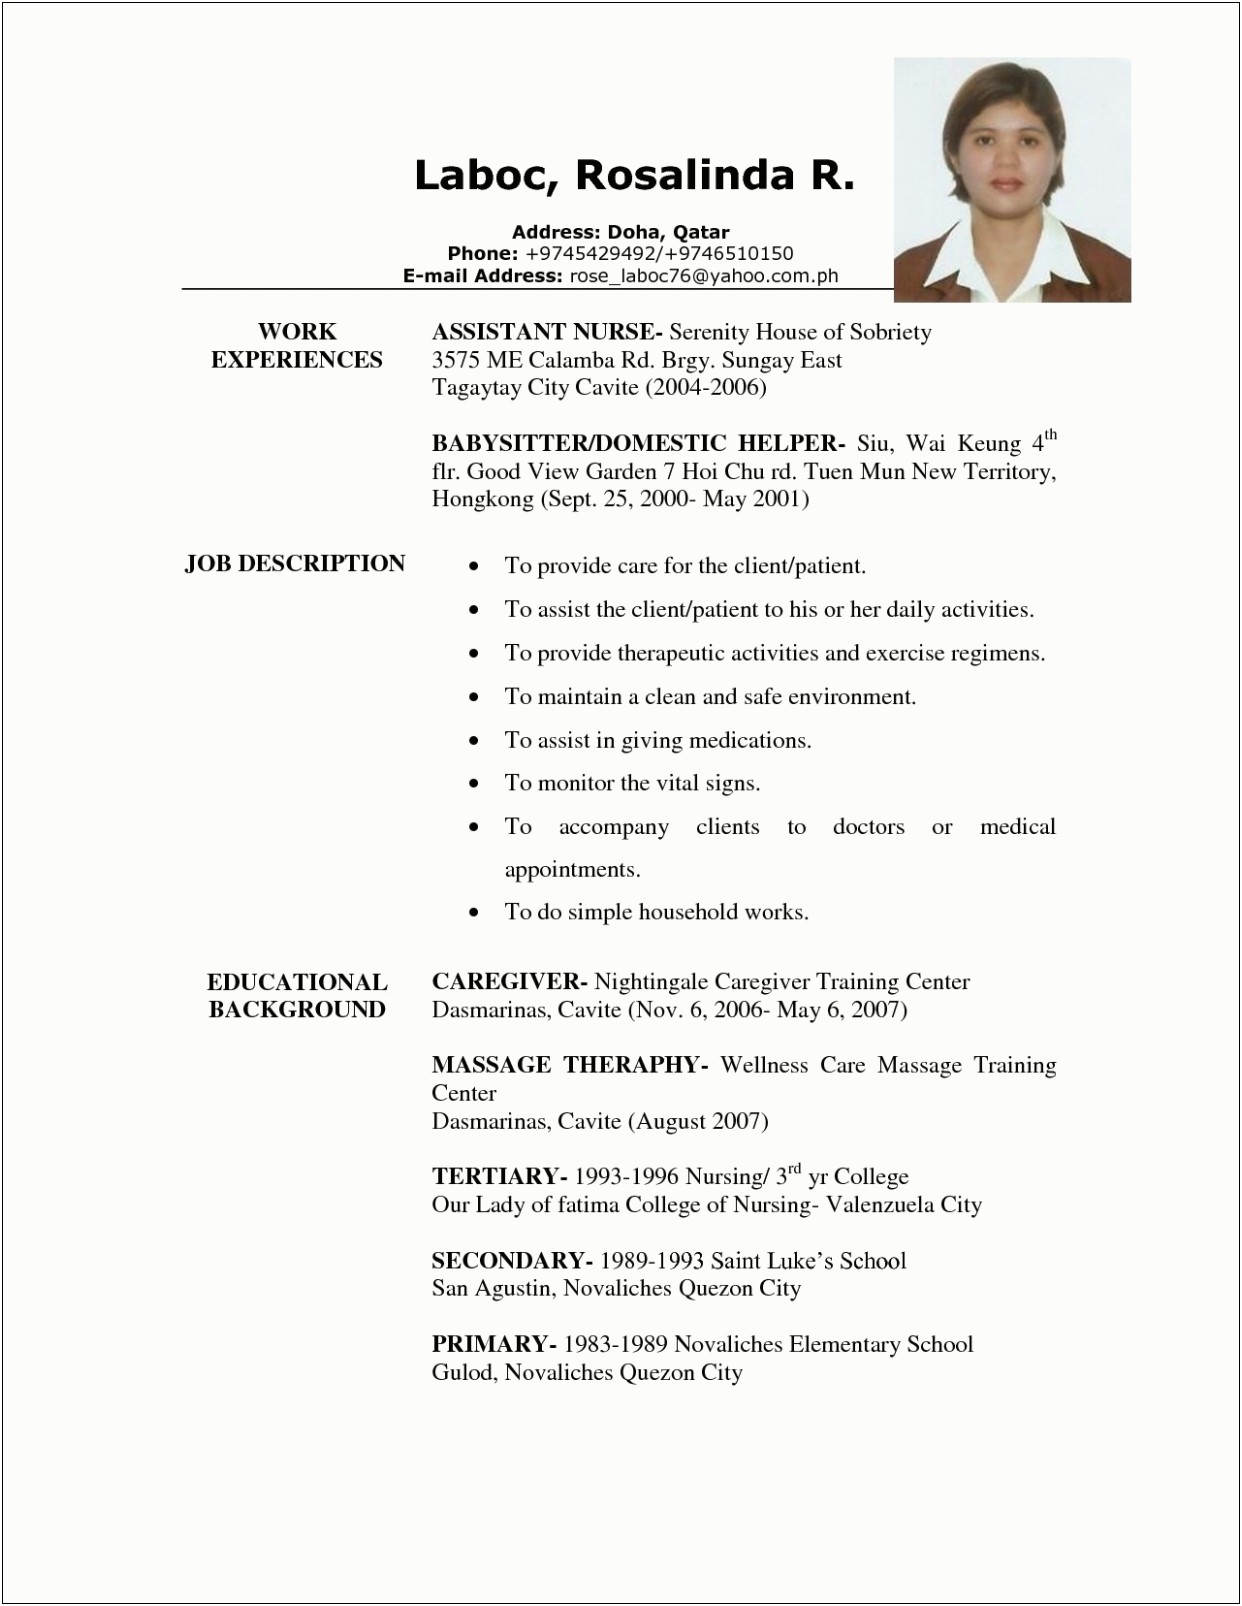 Caregiver Skills And Abilities For Resume